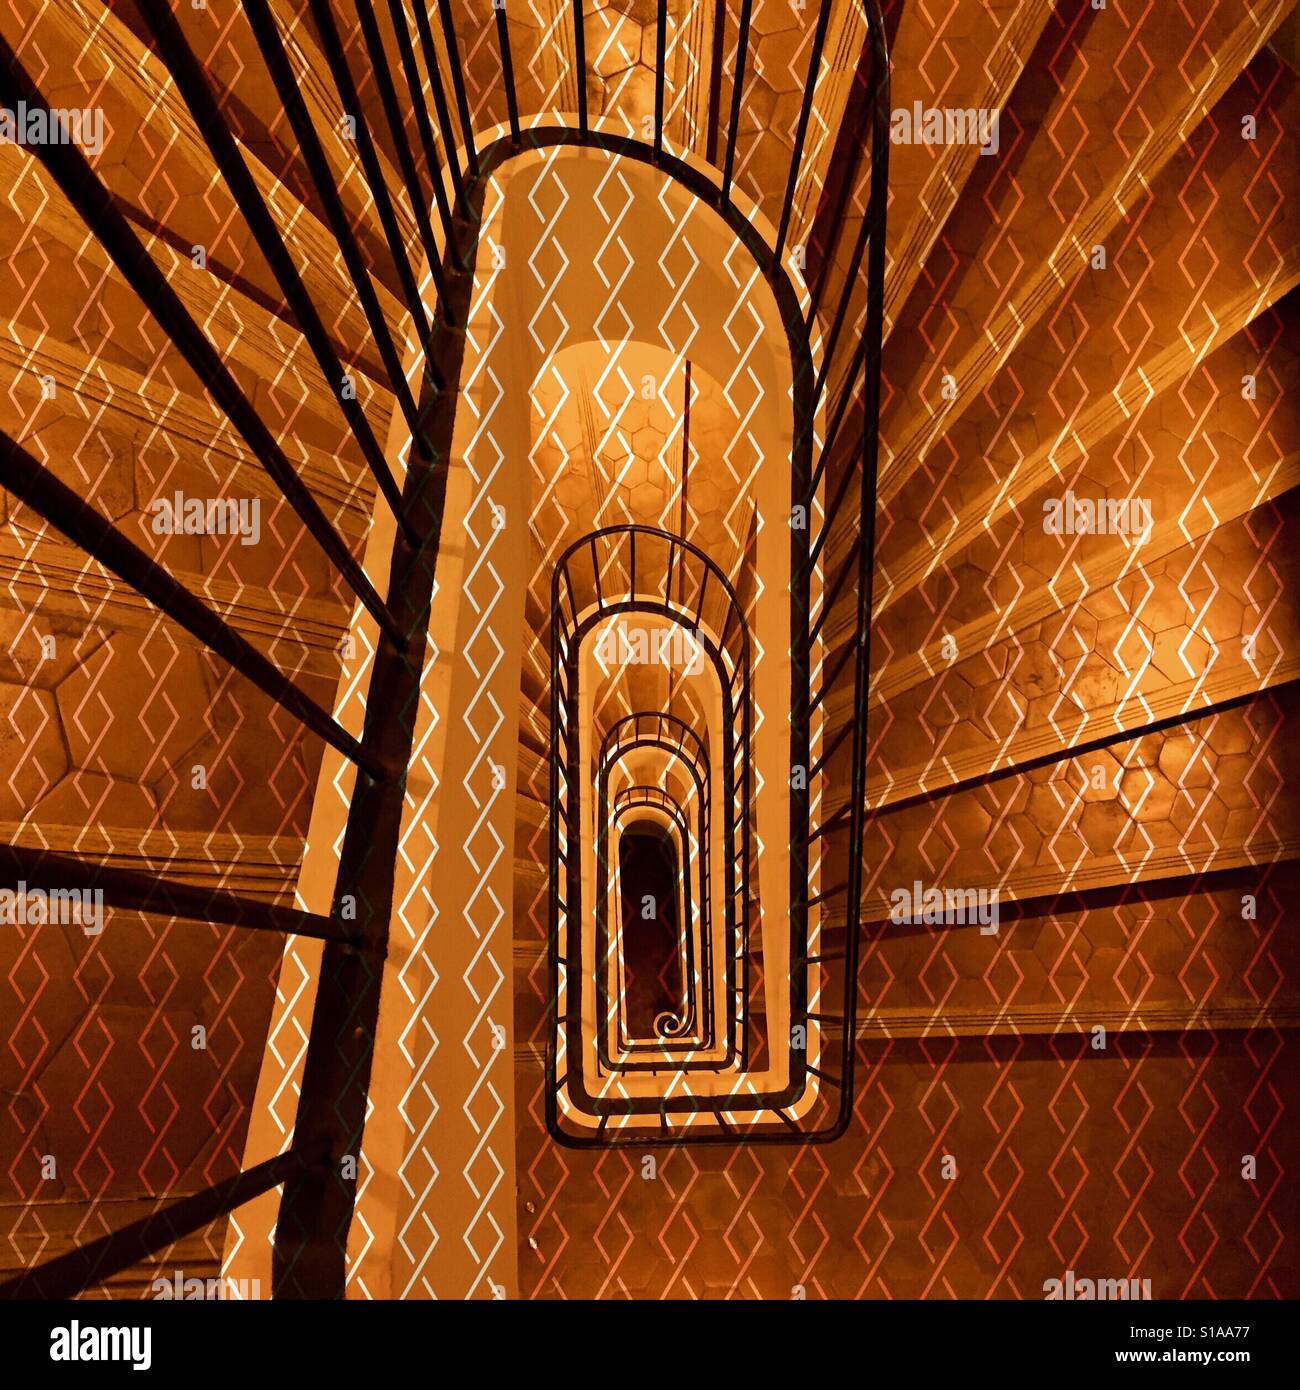 Staircase in a snail shell pattern Stock Photo